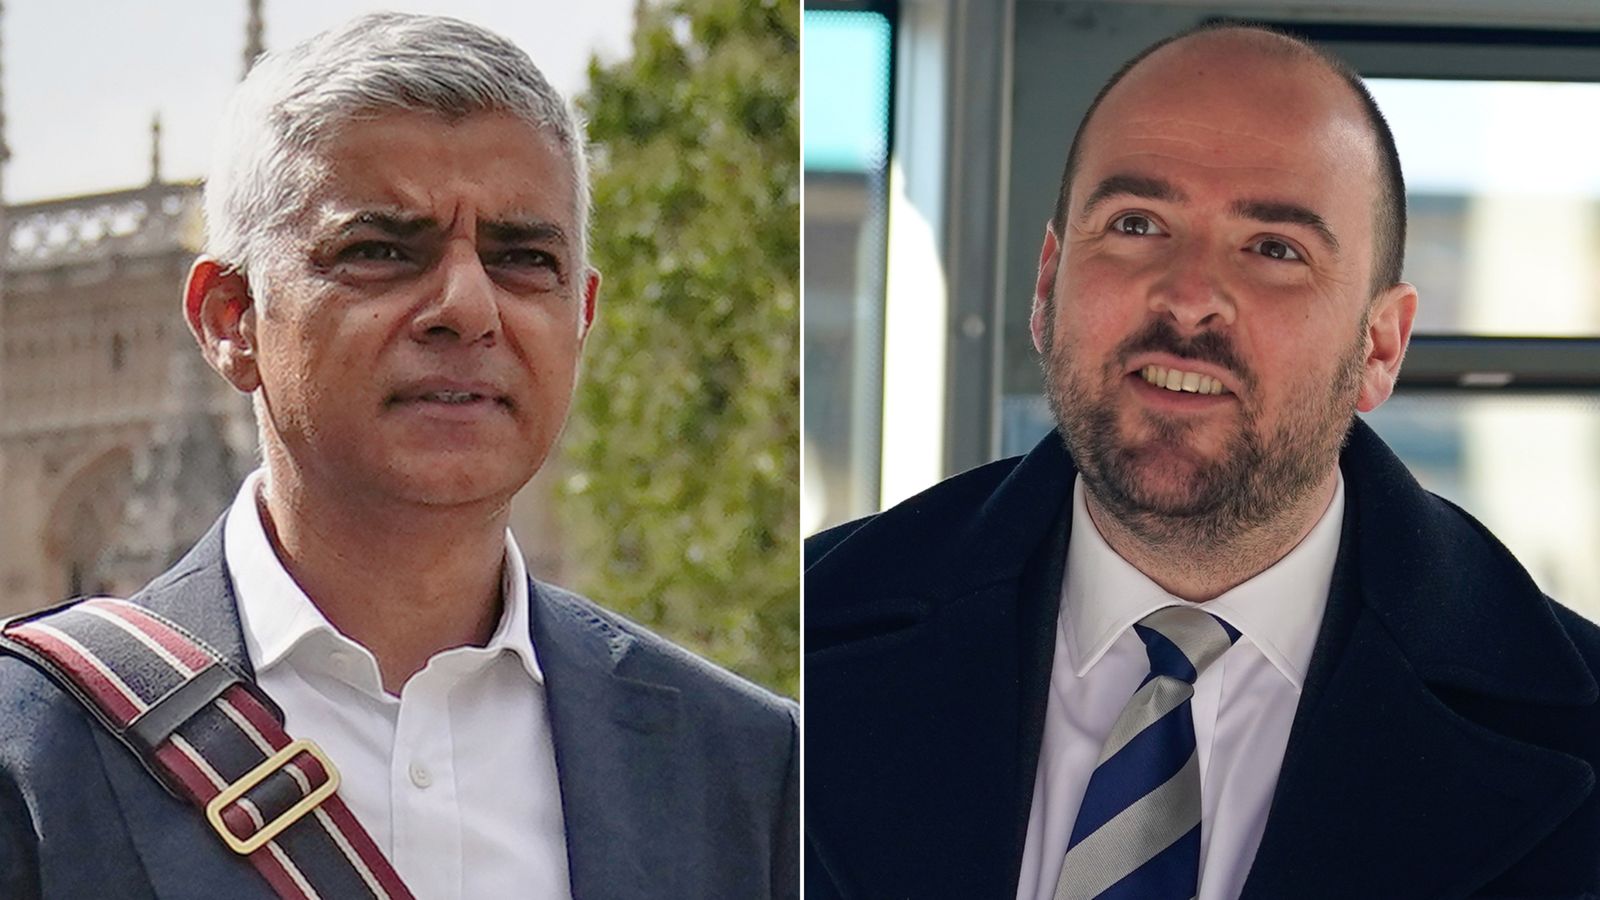 London mayor Sadiq Khan and Tory minister Richard Holden trade blows over knife crime in capital